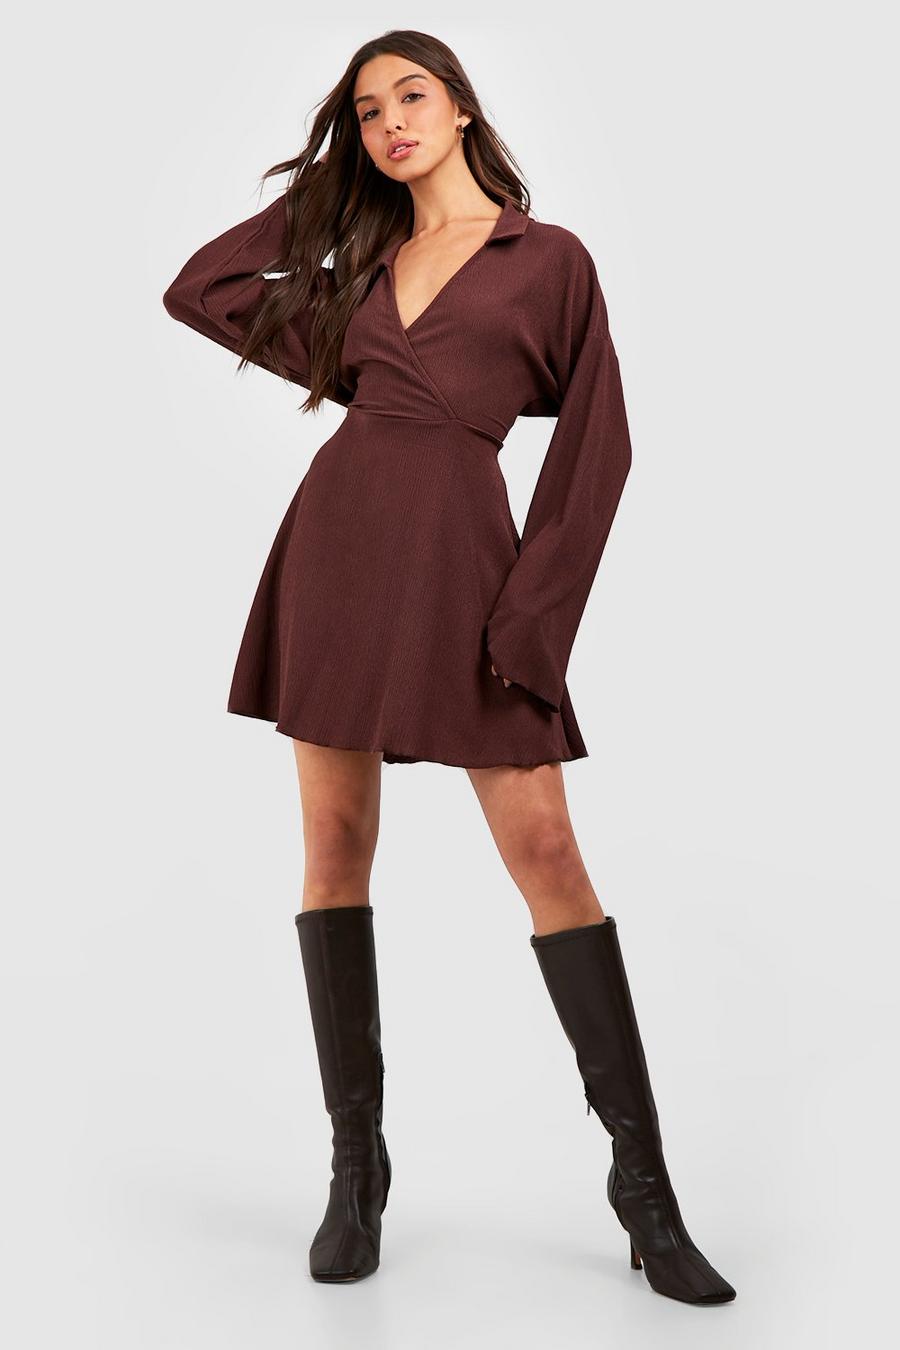 Chocolate brown Textured Collared Skater Dress